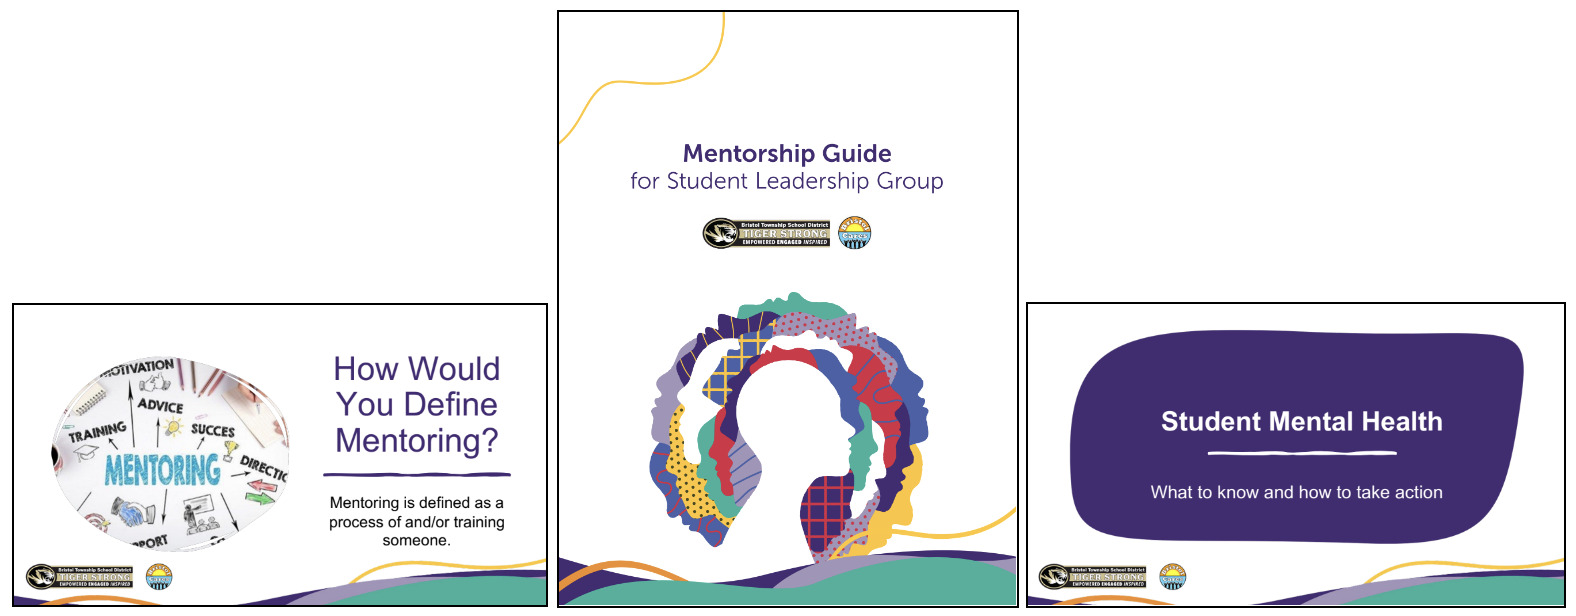 Three slides from different mentorship resources: How Would You Define Mentoring, Mentorship Guide, Student Mental Health